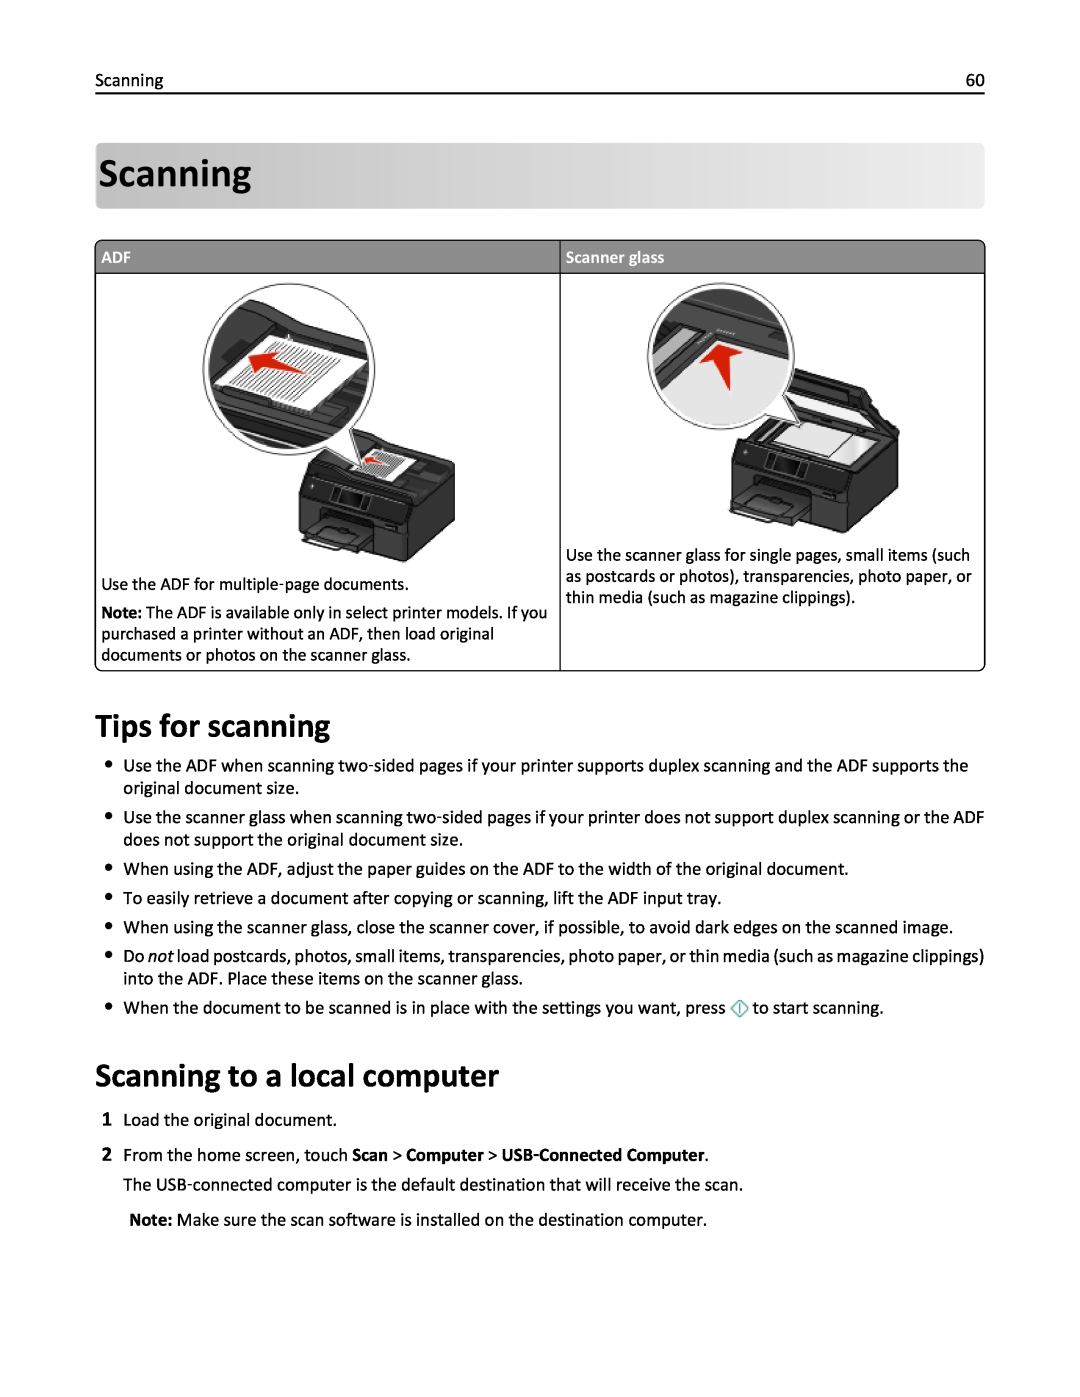 Lexmark 20E, 200 manual Tips for scanning, Scanning to a local computer 